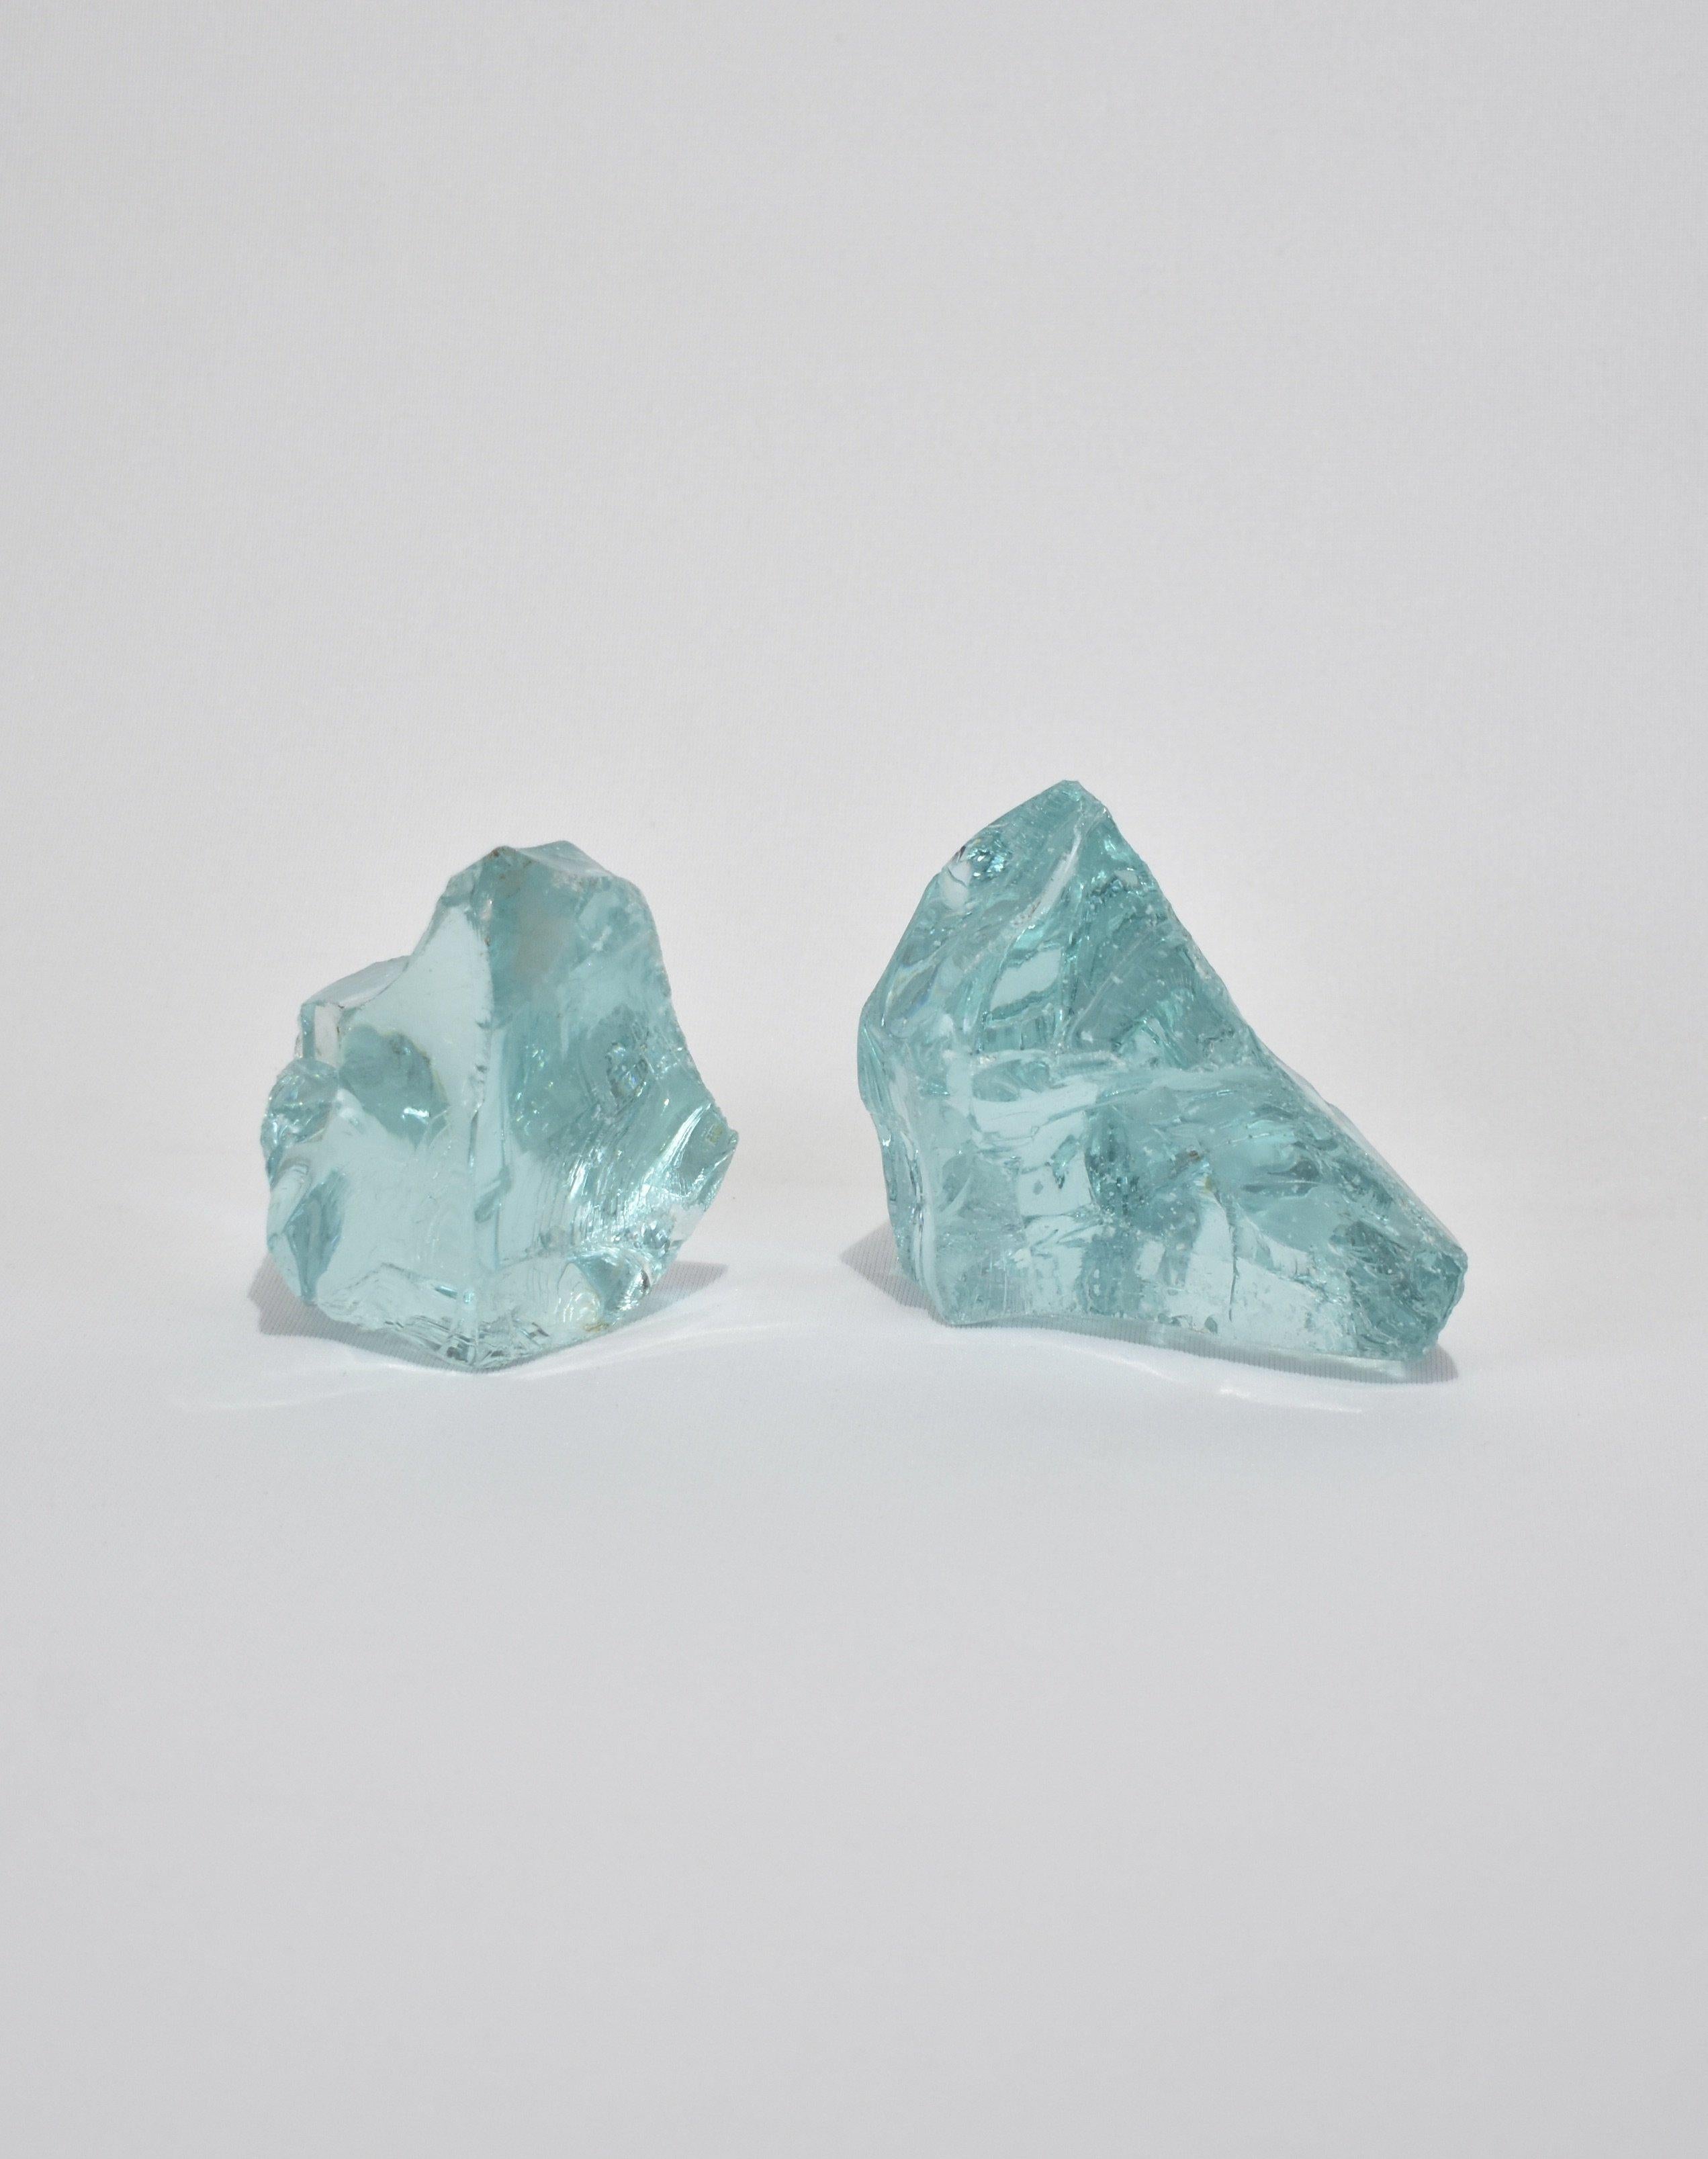 Slag glass sculpture set in beautiful aqua blue. Display on their own or with an arrangement of books as bookends.

Dimensions
3.5